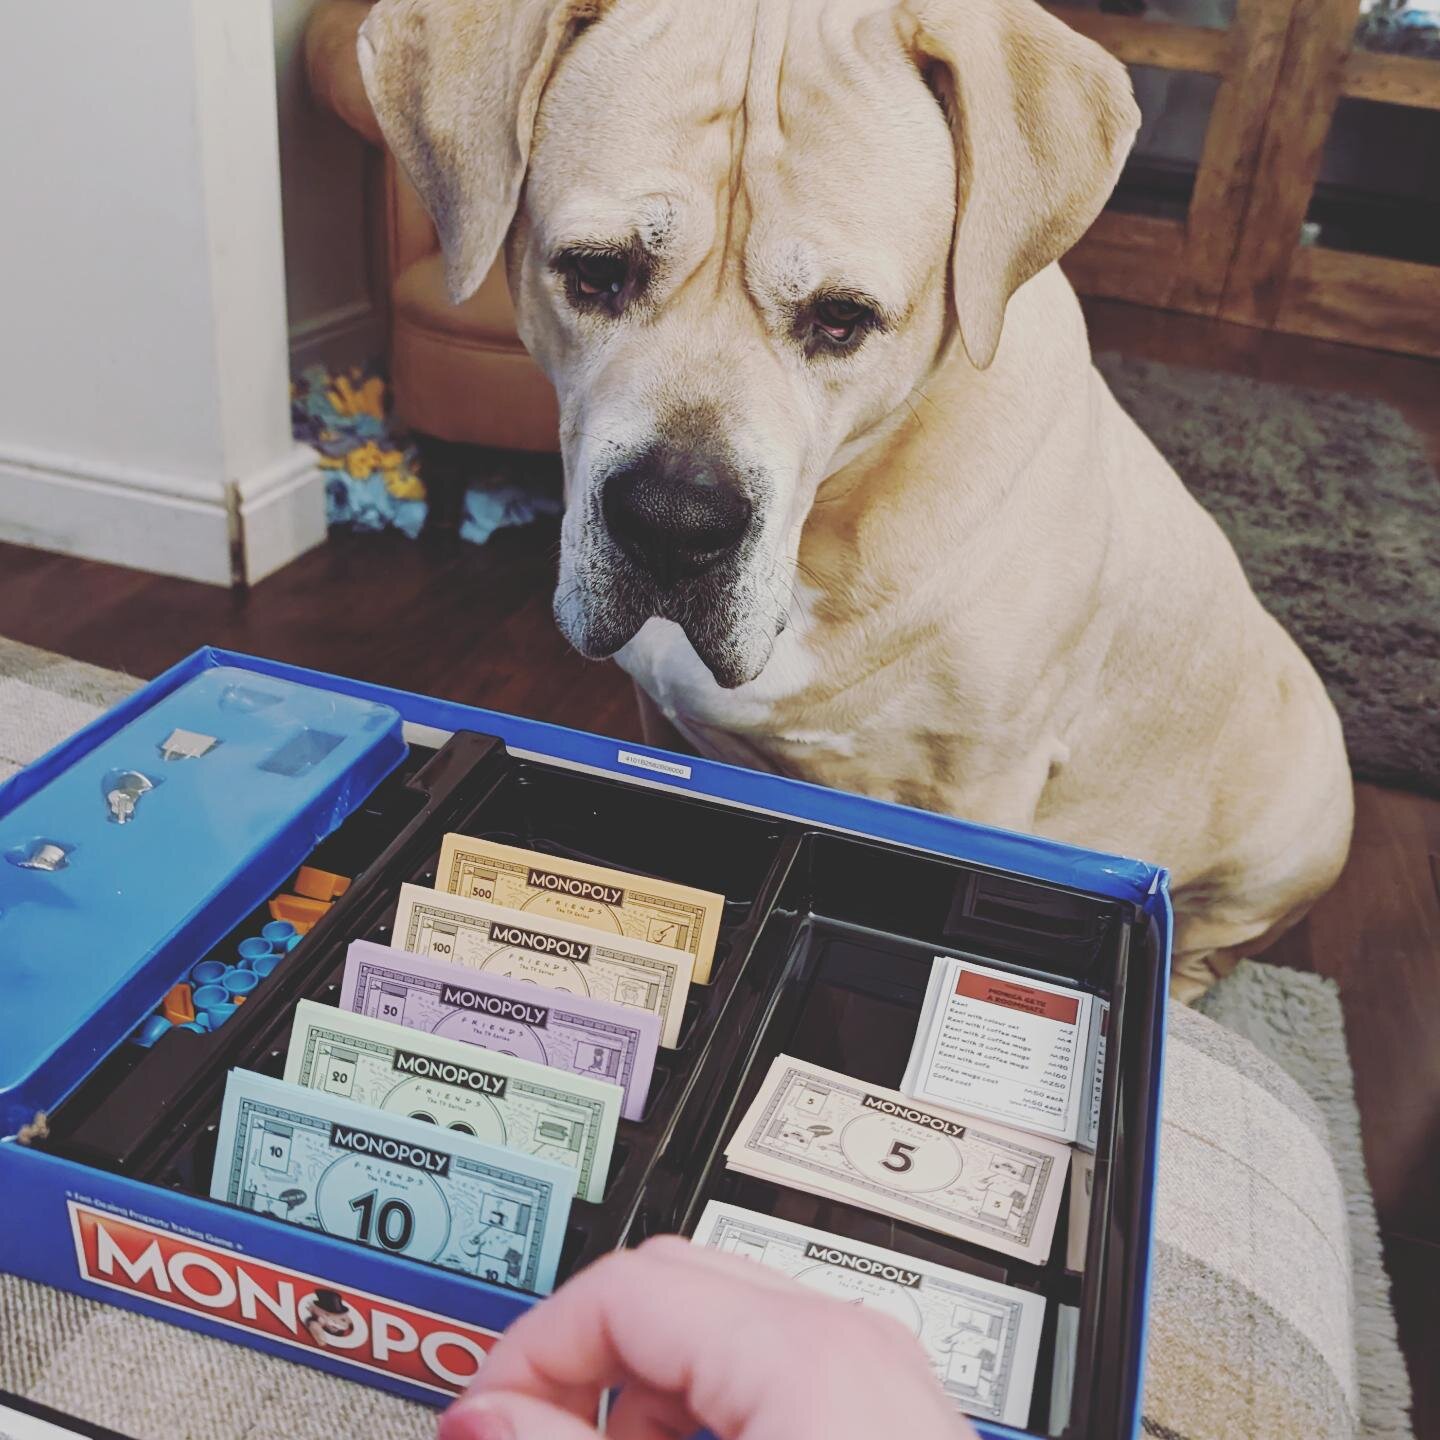 @jabba.the.mastiff helped keep us on the straight and narrow tonight in our game of Friends Monopoly, @hasbrogamingofficial

#jabbathemutt #mastiffsofinstagram #gamesnight #monopoly #banker #games #boerboel #boerboelsofinstagram #friends